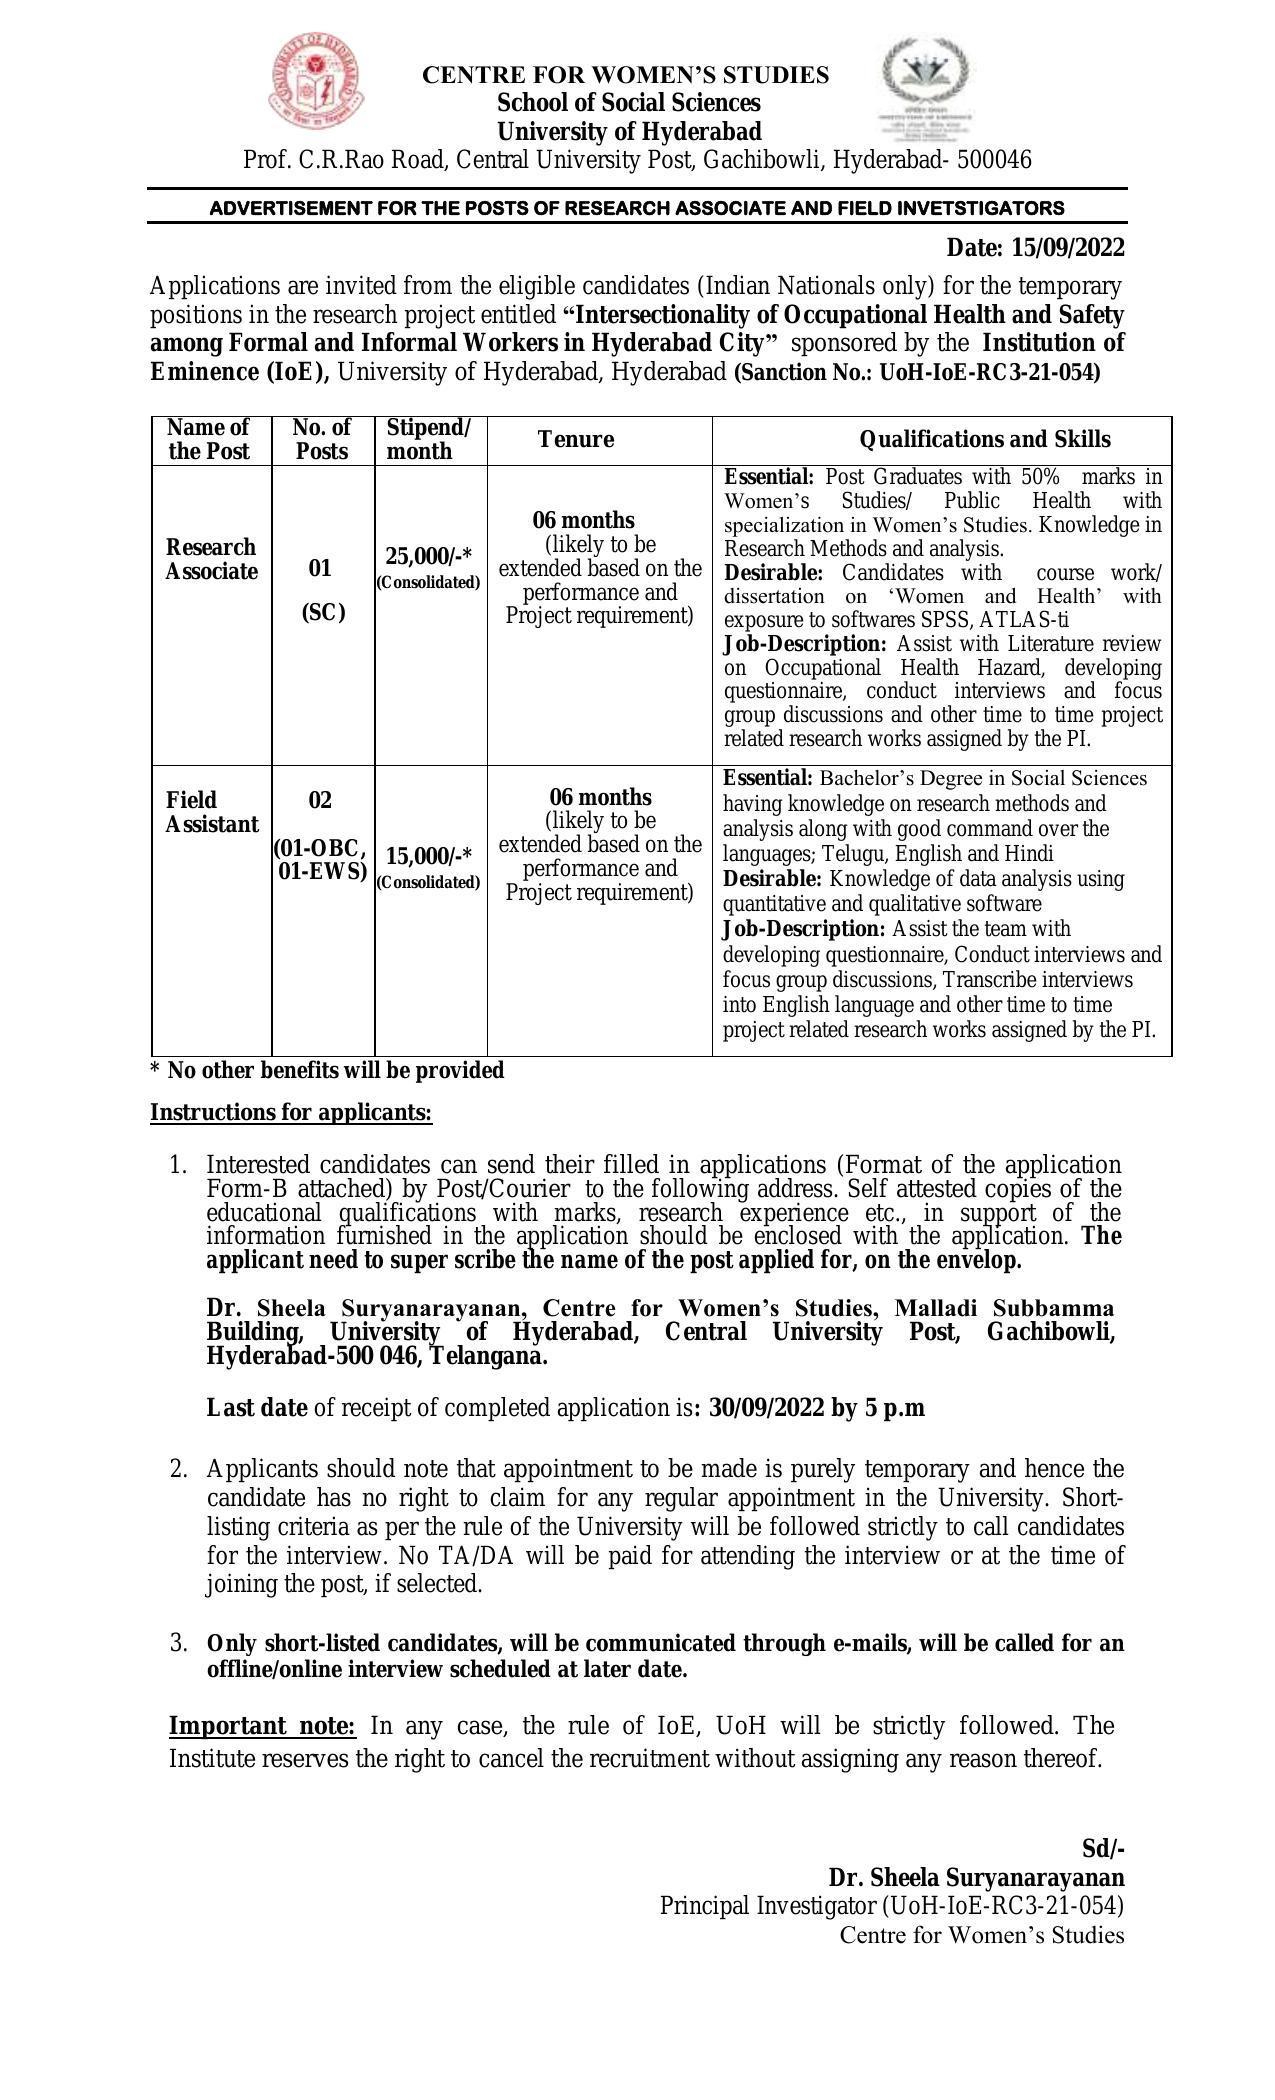 University of Hyderabad (UoH) Invites Application for Research Associate, Field Assistant Recruitment 2022 - Page 3